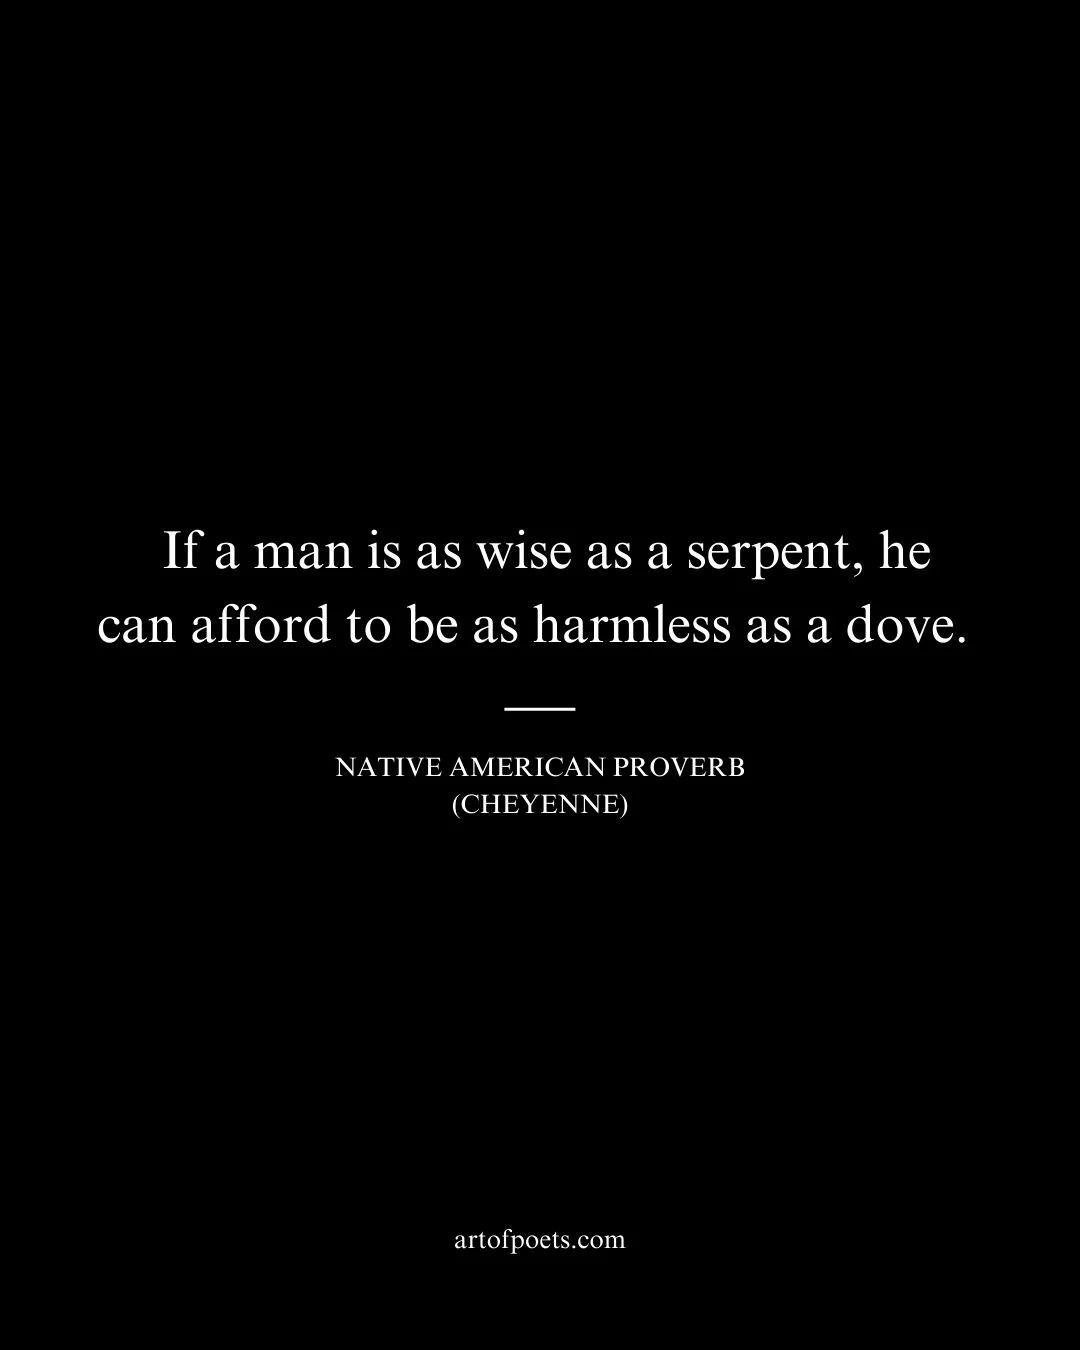 If a man is as wise as a serpent he can afford to be as harmless as a dove